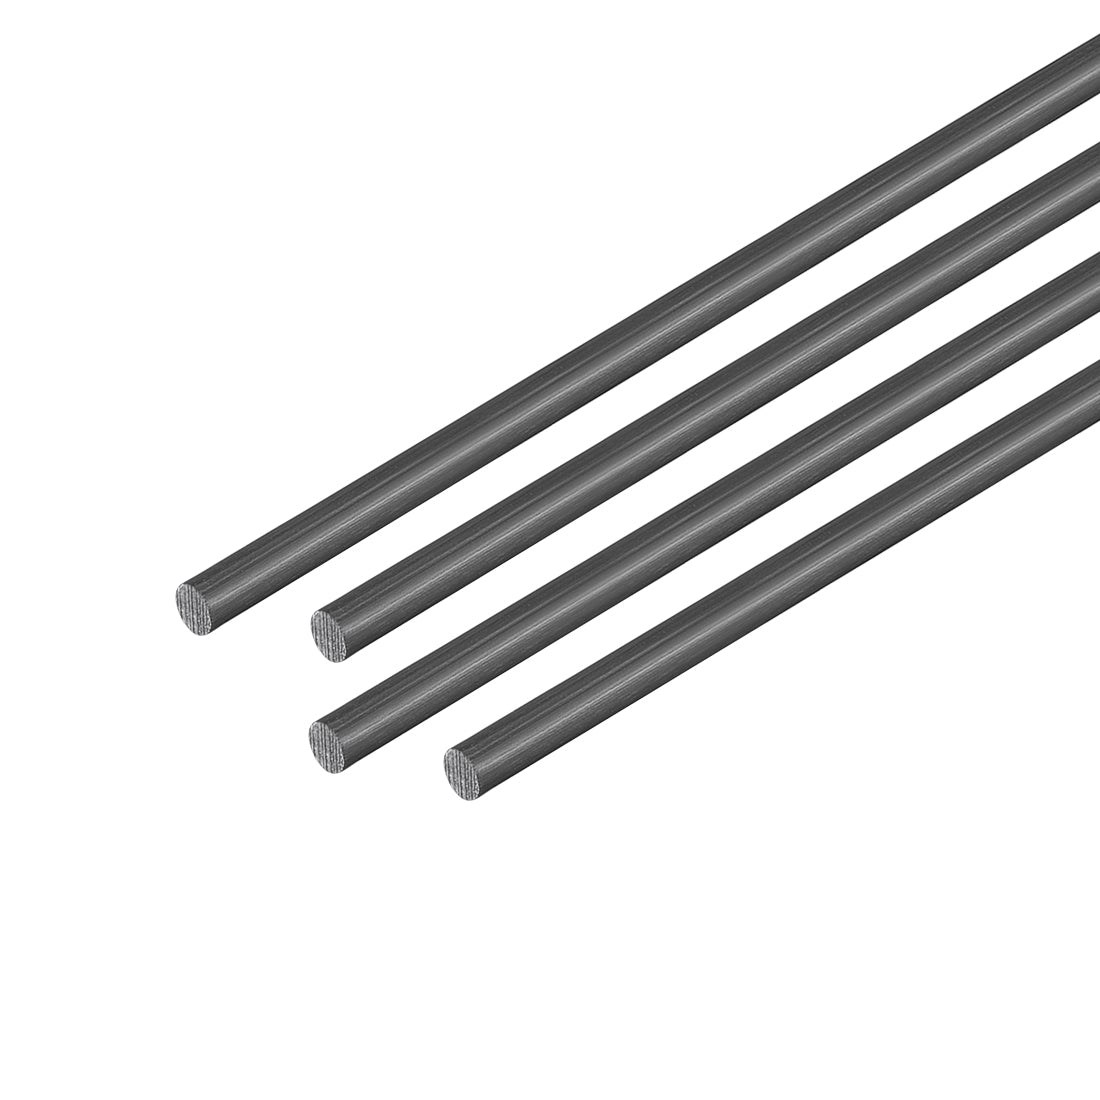 Uxcell Uxcell Carbon Fiber Rod 5mm, 500mm/19.6inch Length for RC Airplane Matte Pole, 4pcs